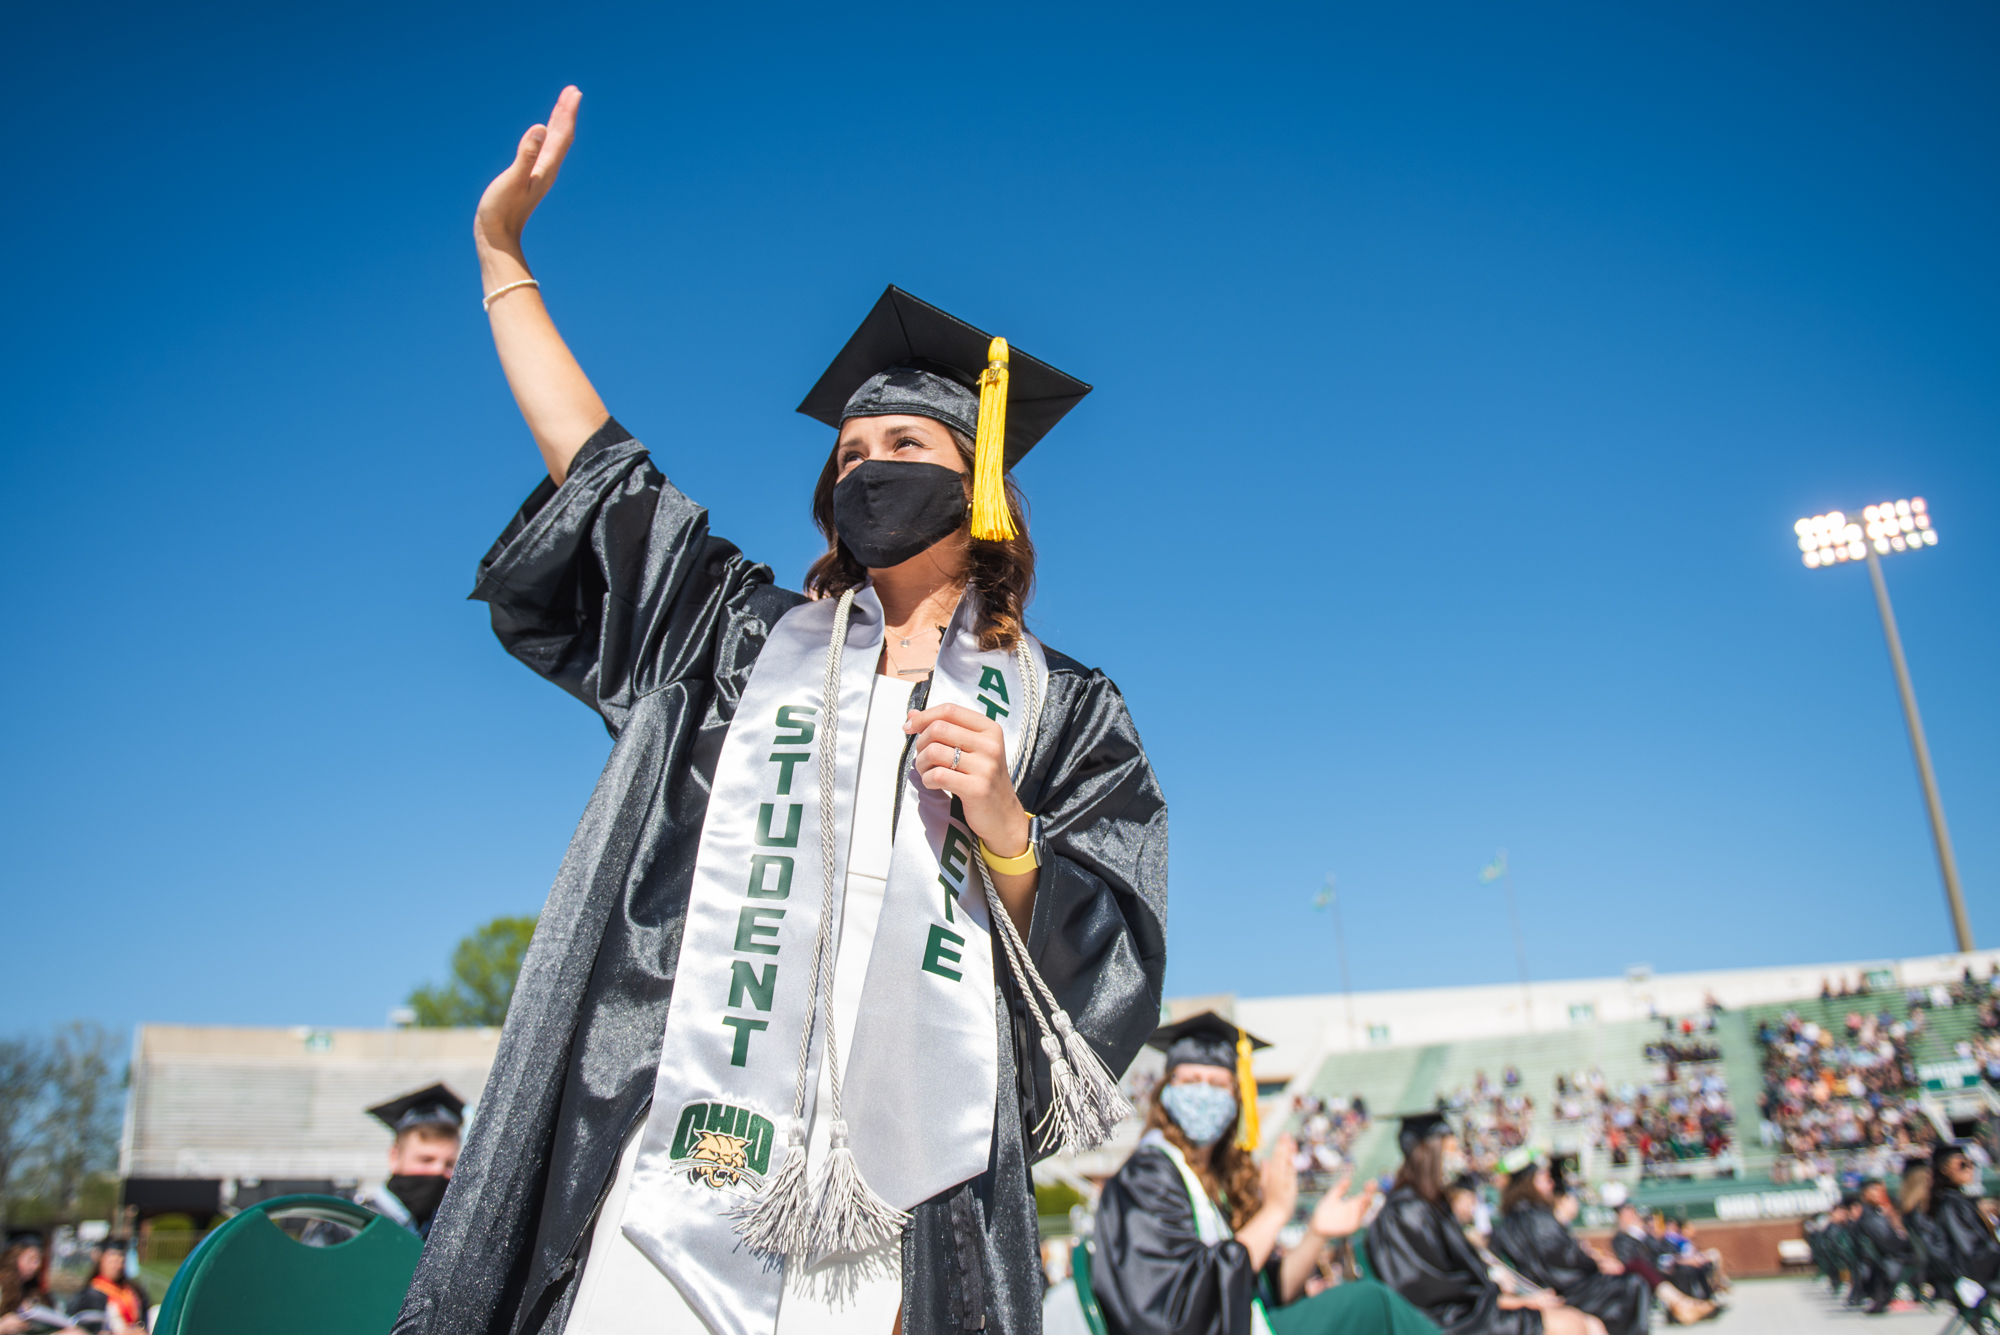 A graduating student waves to the crowd